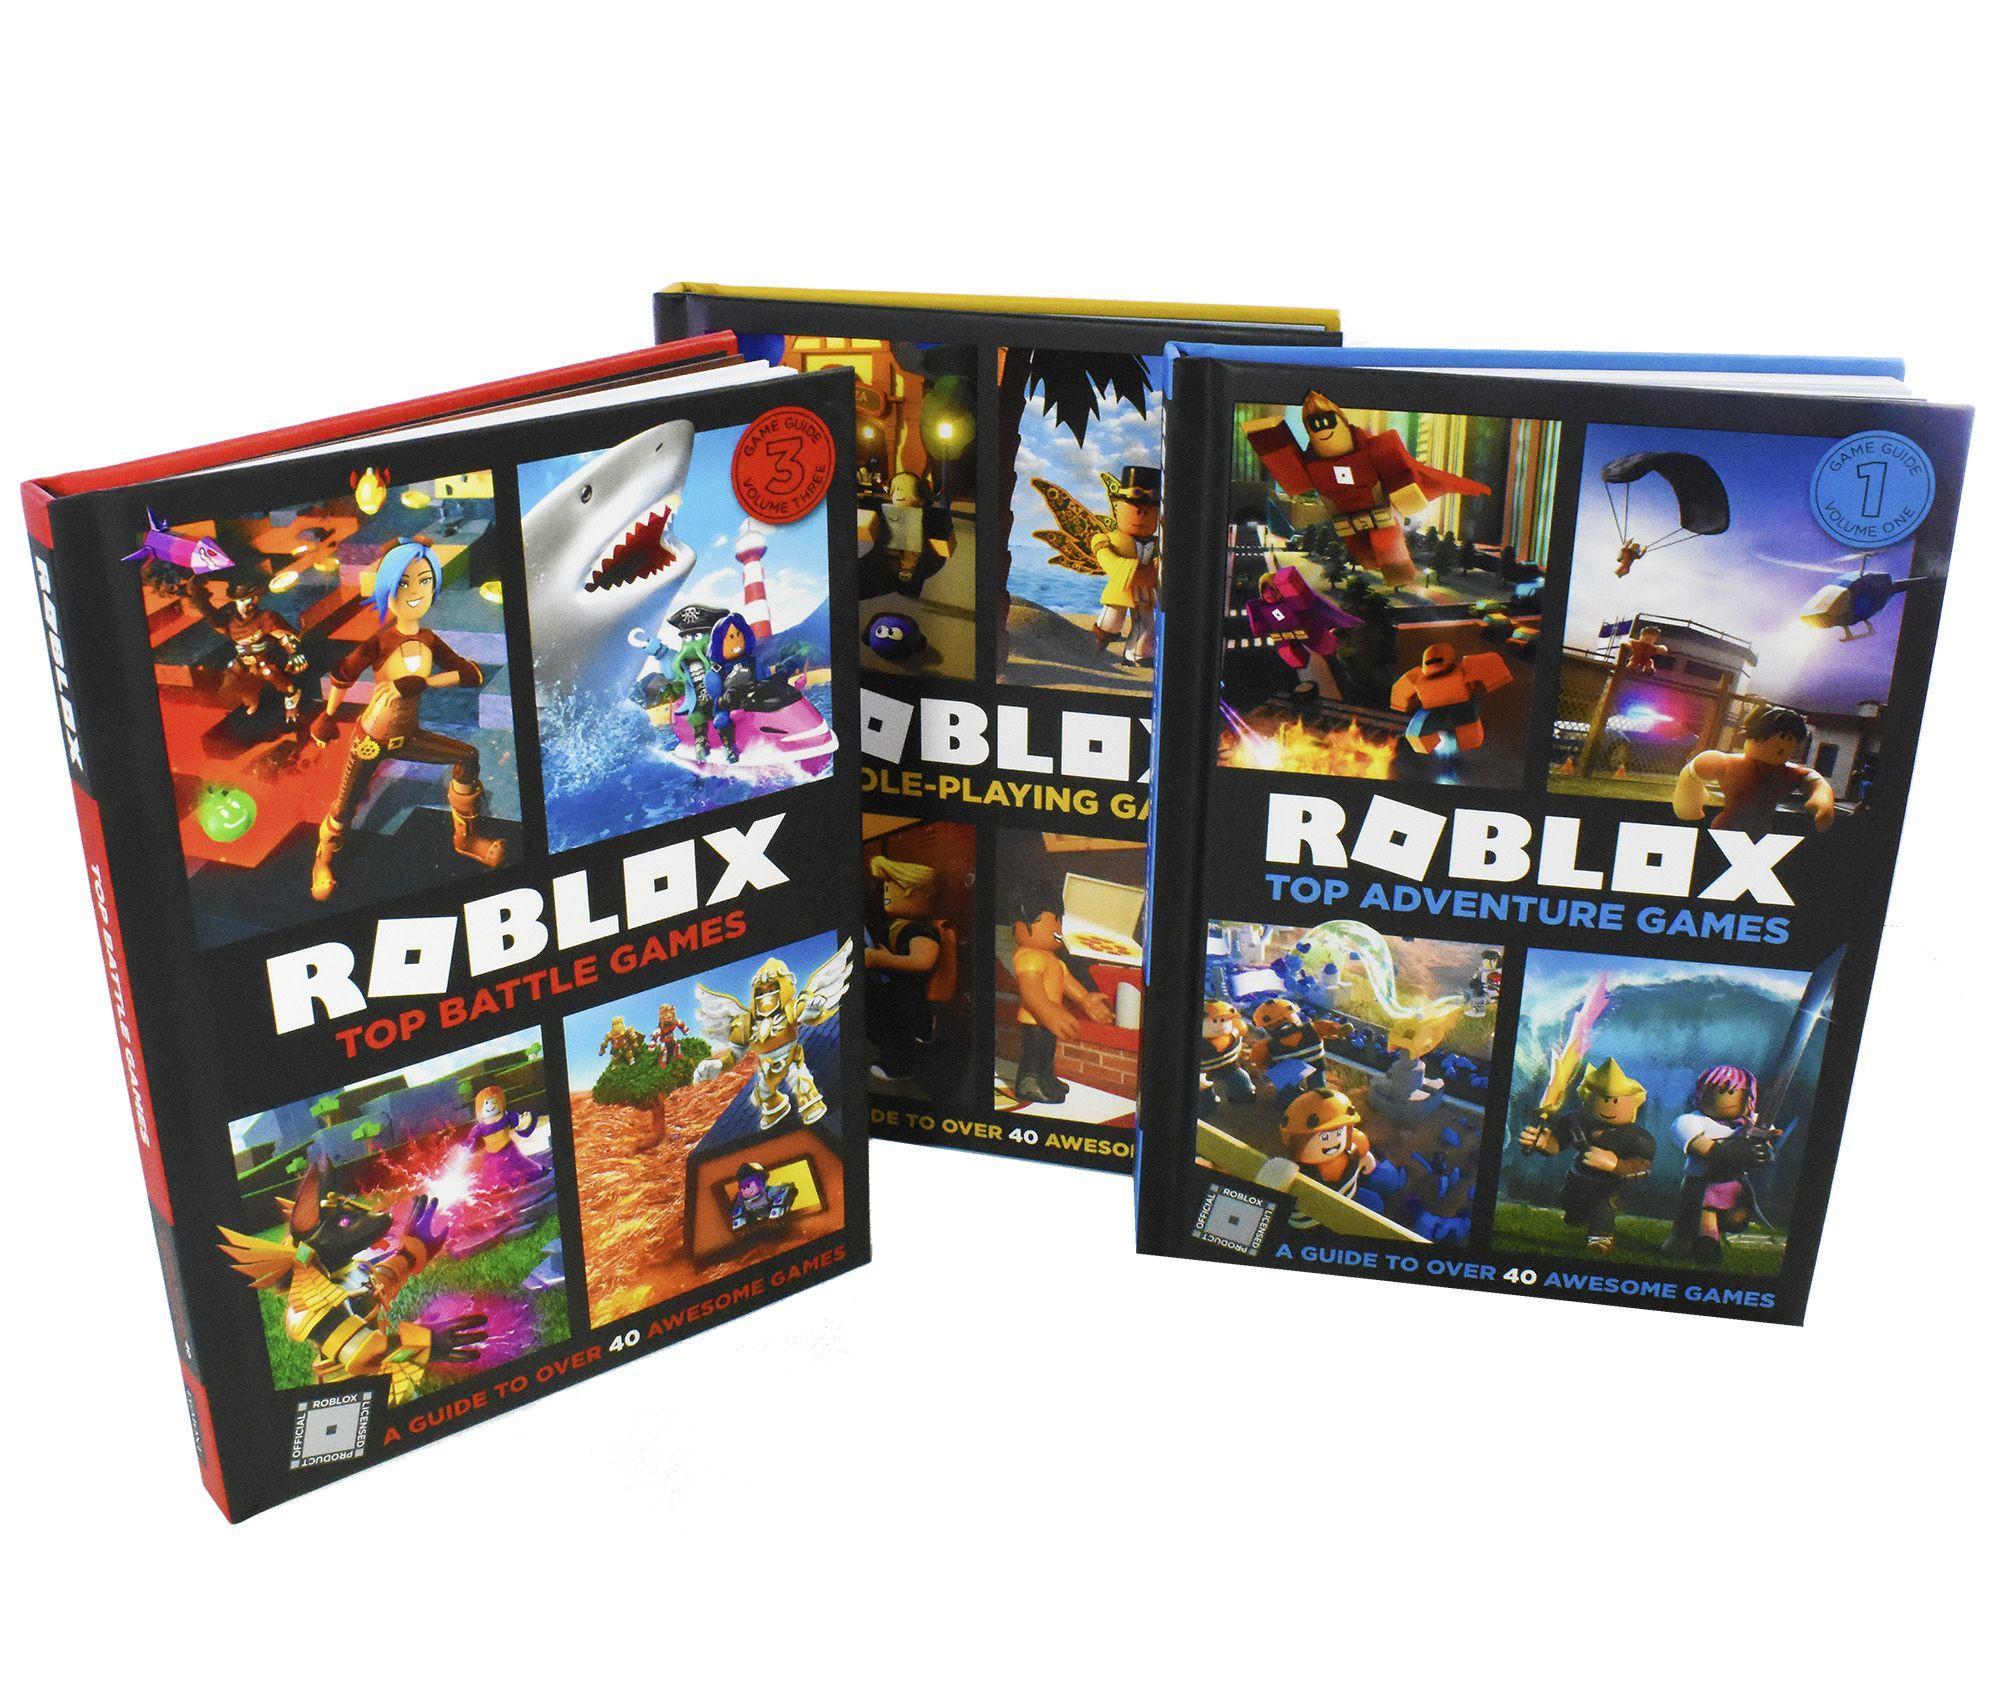 Roblox Ultimate Guide 3 Books Children Collection Hardback By David Jagneaux St Stephens Books - roblox top battle games by official roblox hardcover